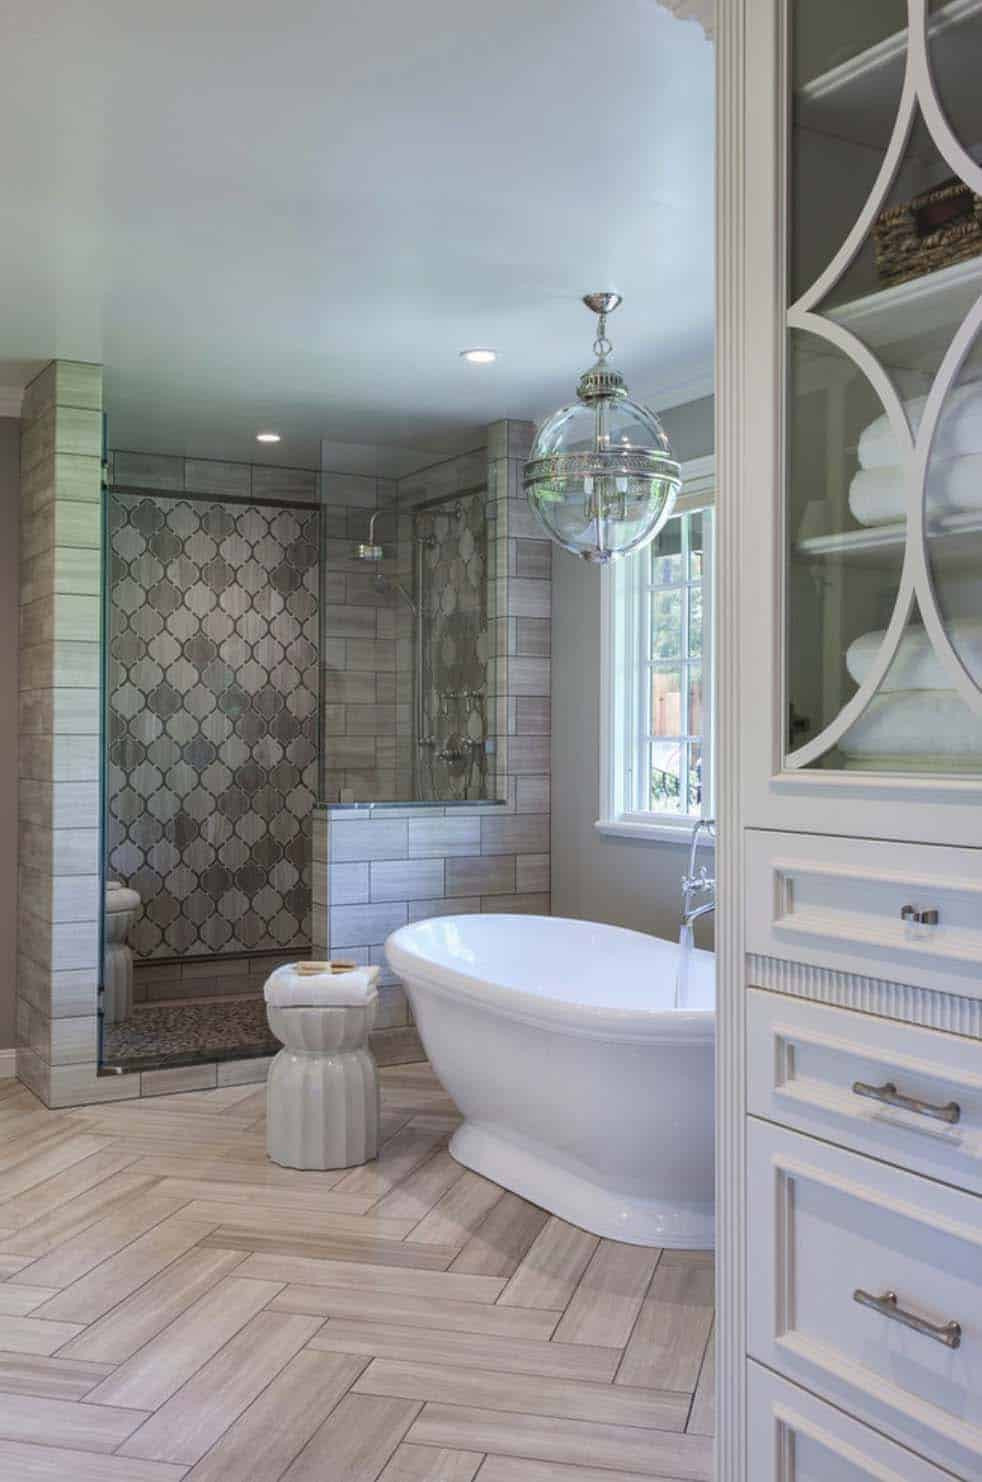 Traditional Bathroom Tile Ideas
 53 Most fabulous traditional style bathroom designs ever